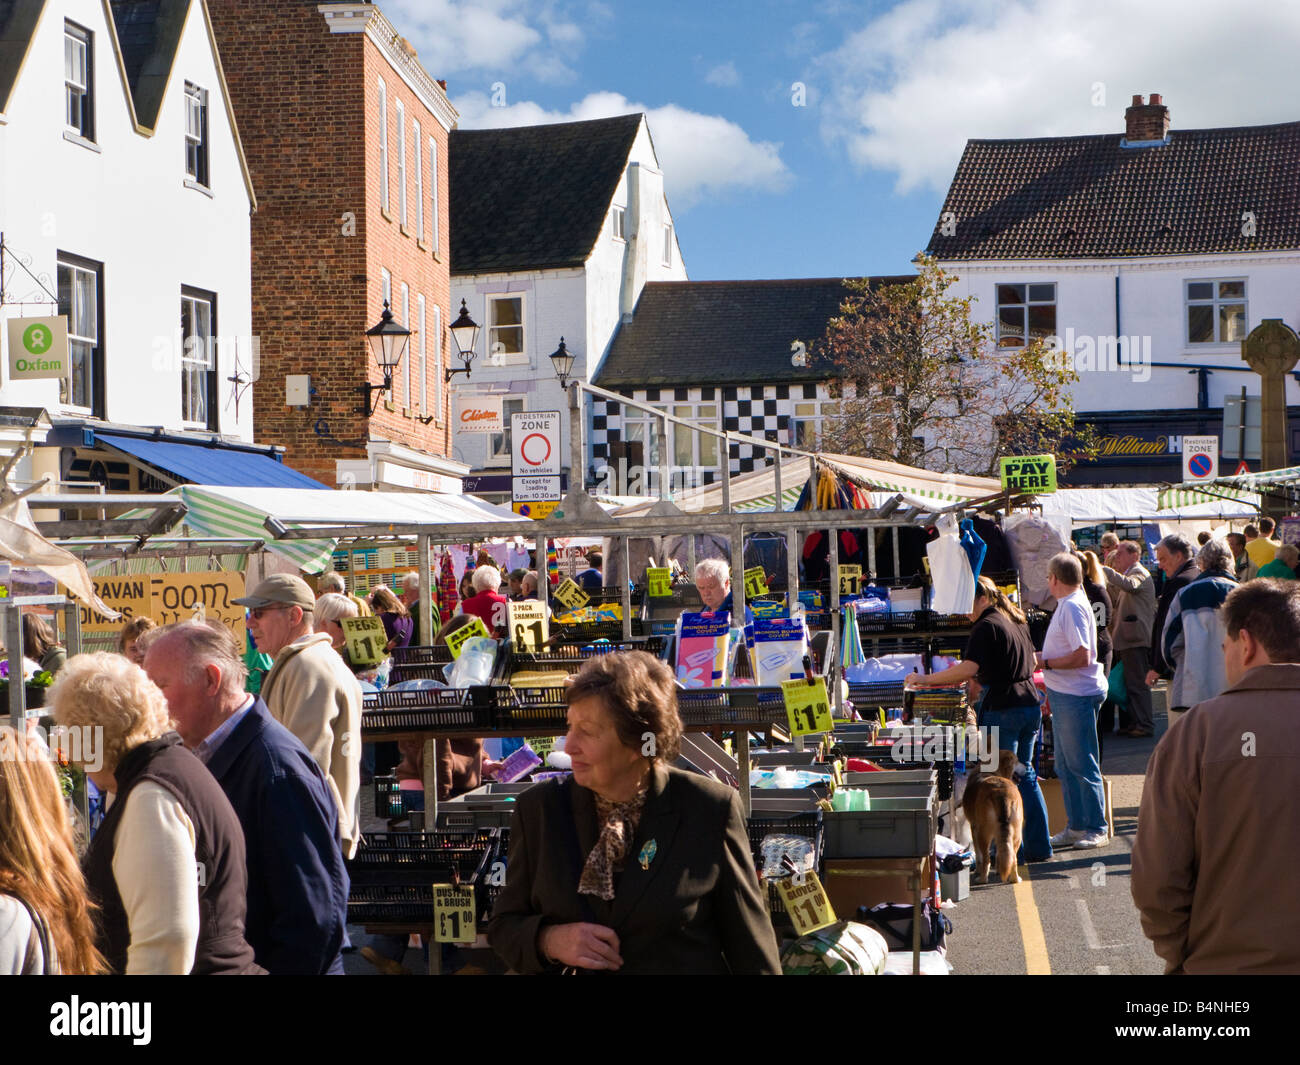 The crowded market in the Market Place in the small town of Knaresborough, North Yorkshire, England UK Stock Photo